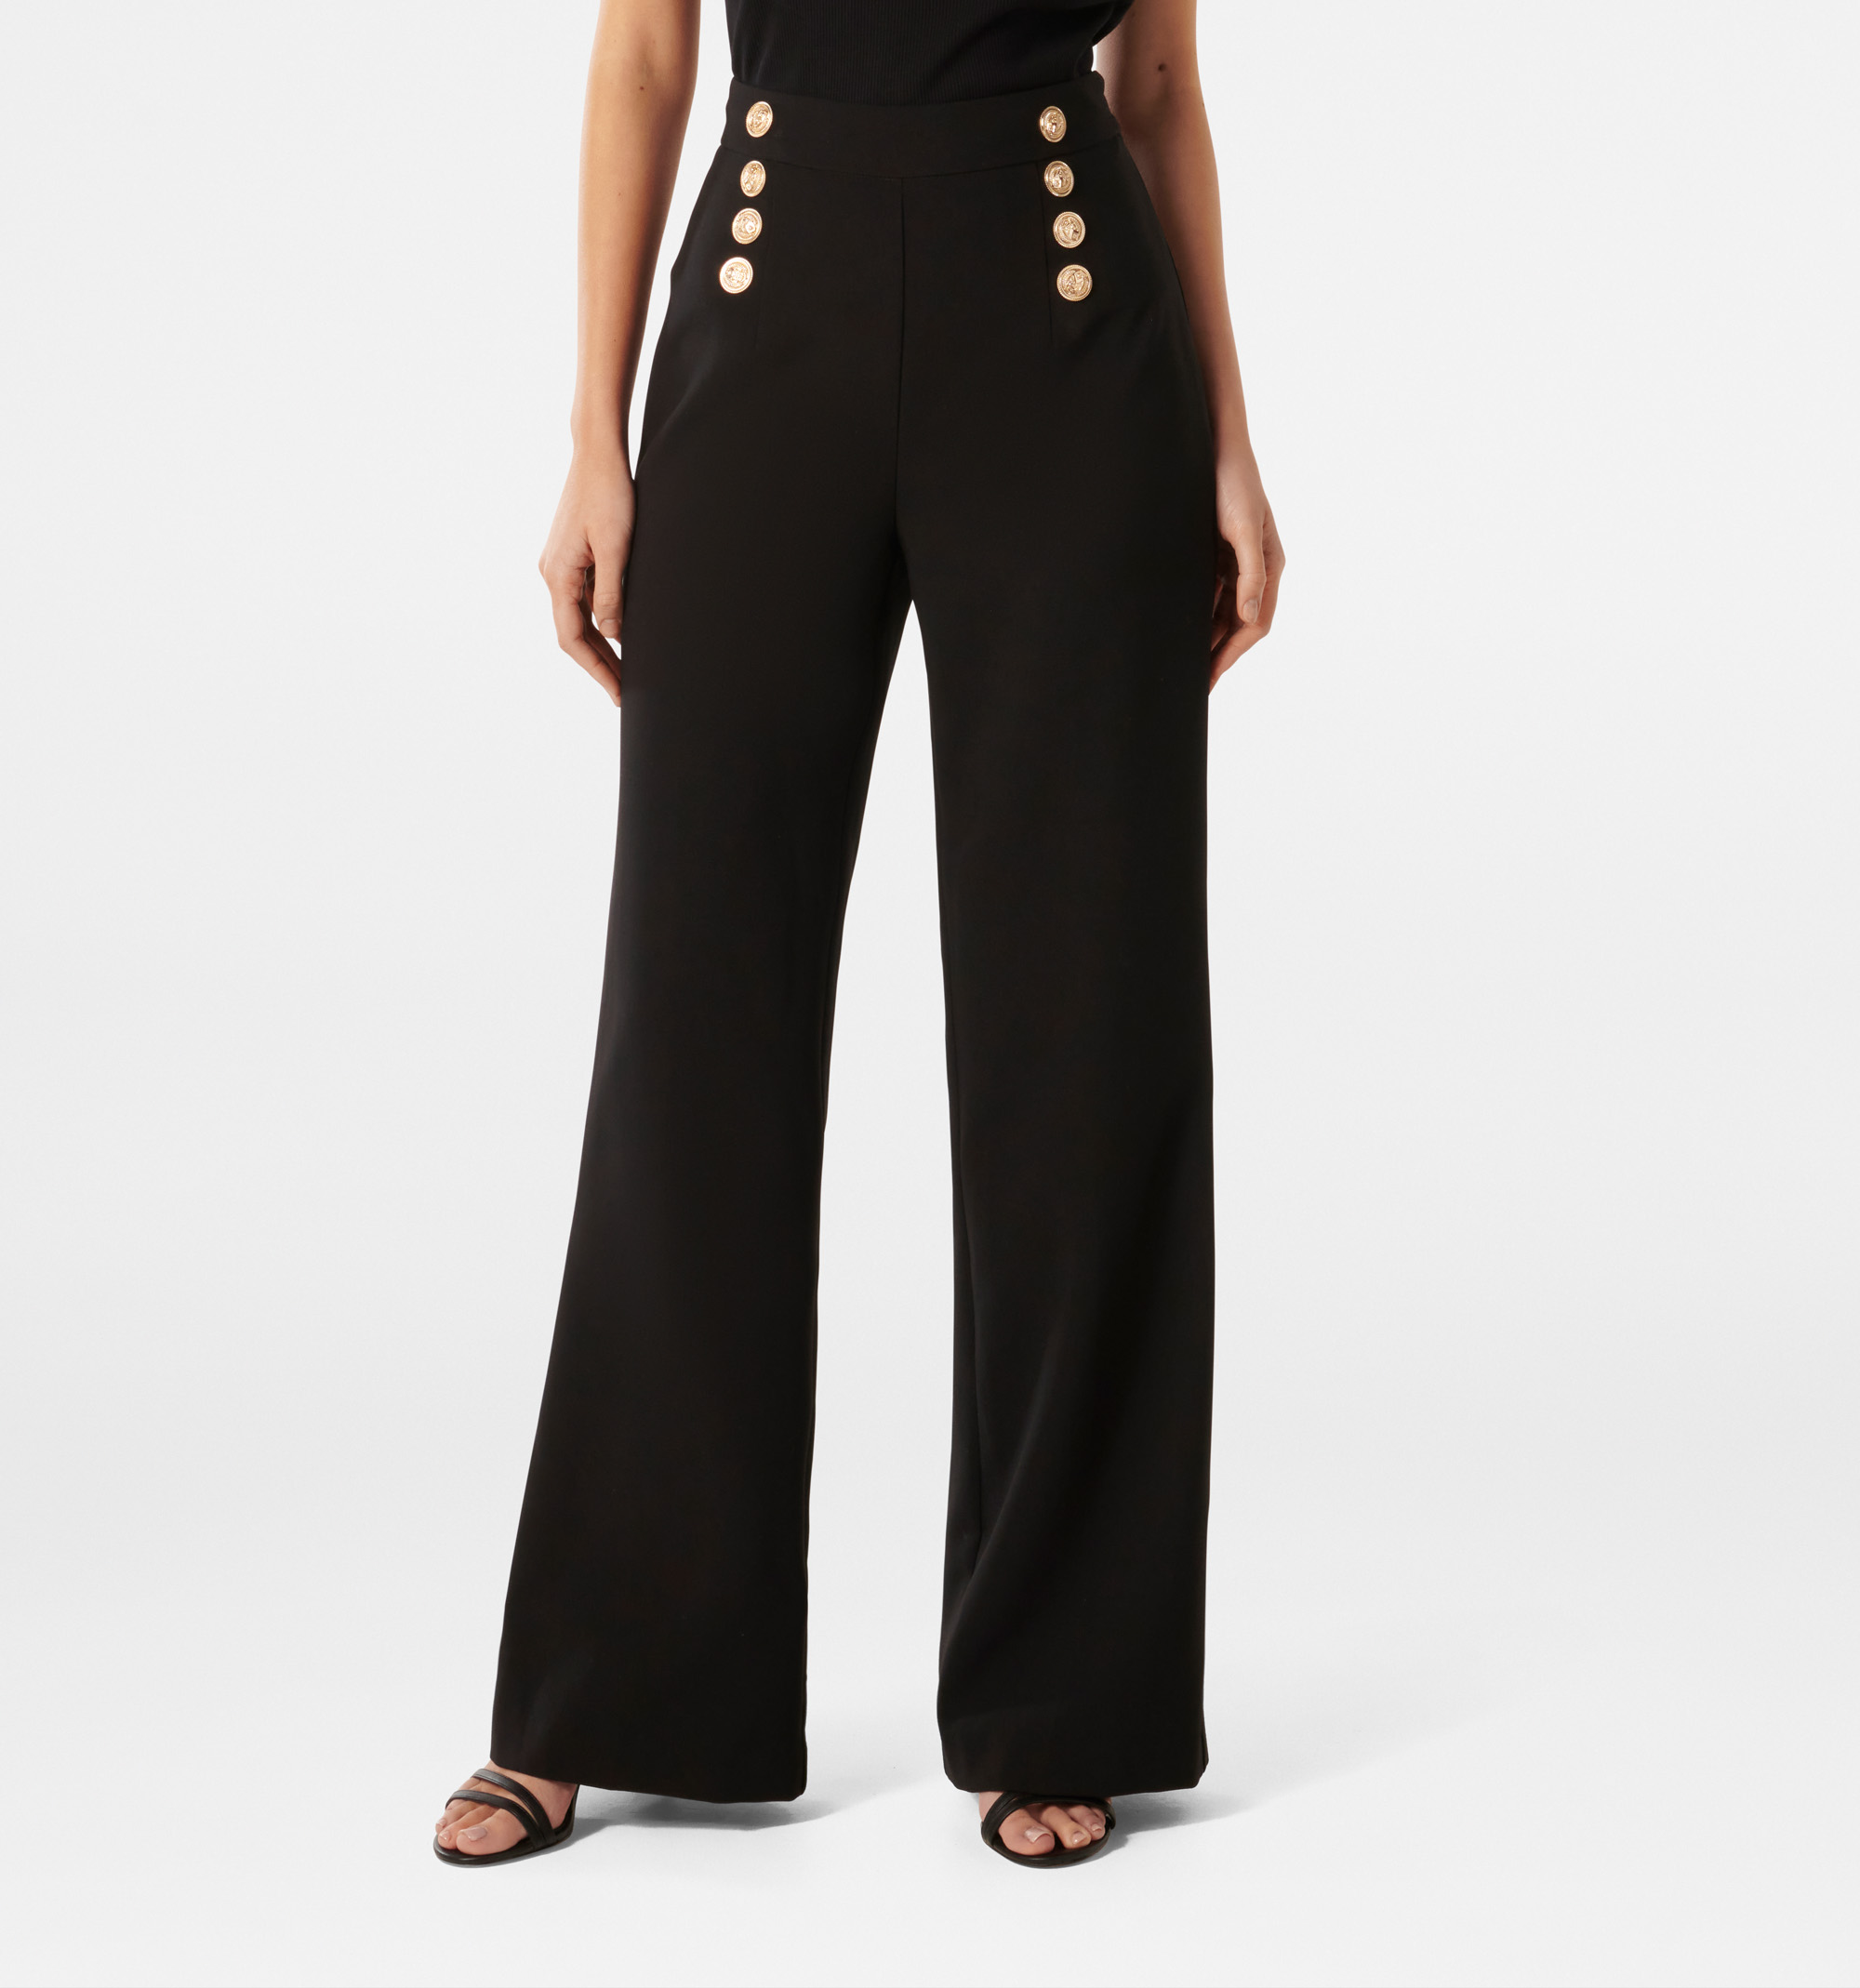 Womens High Waisted Leather Flared Pant Online at Leatherright.com